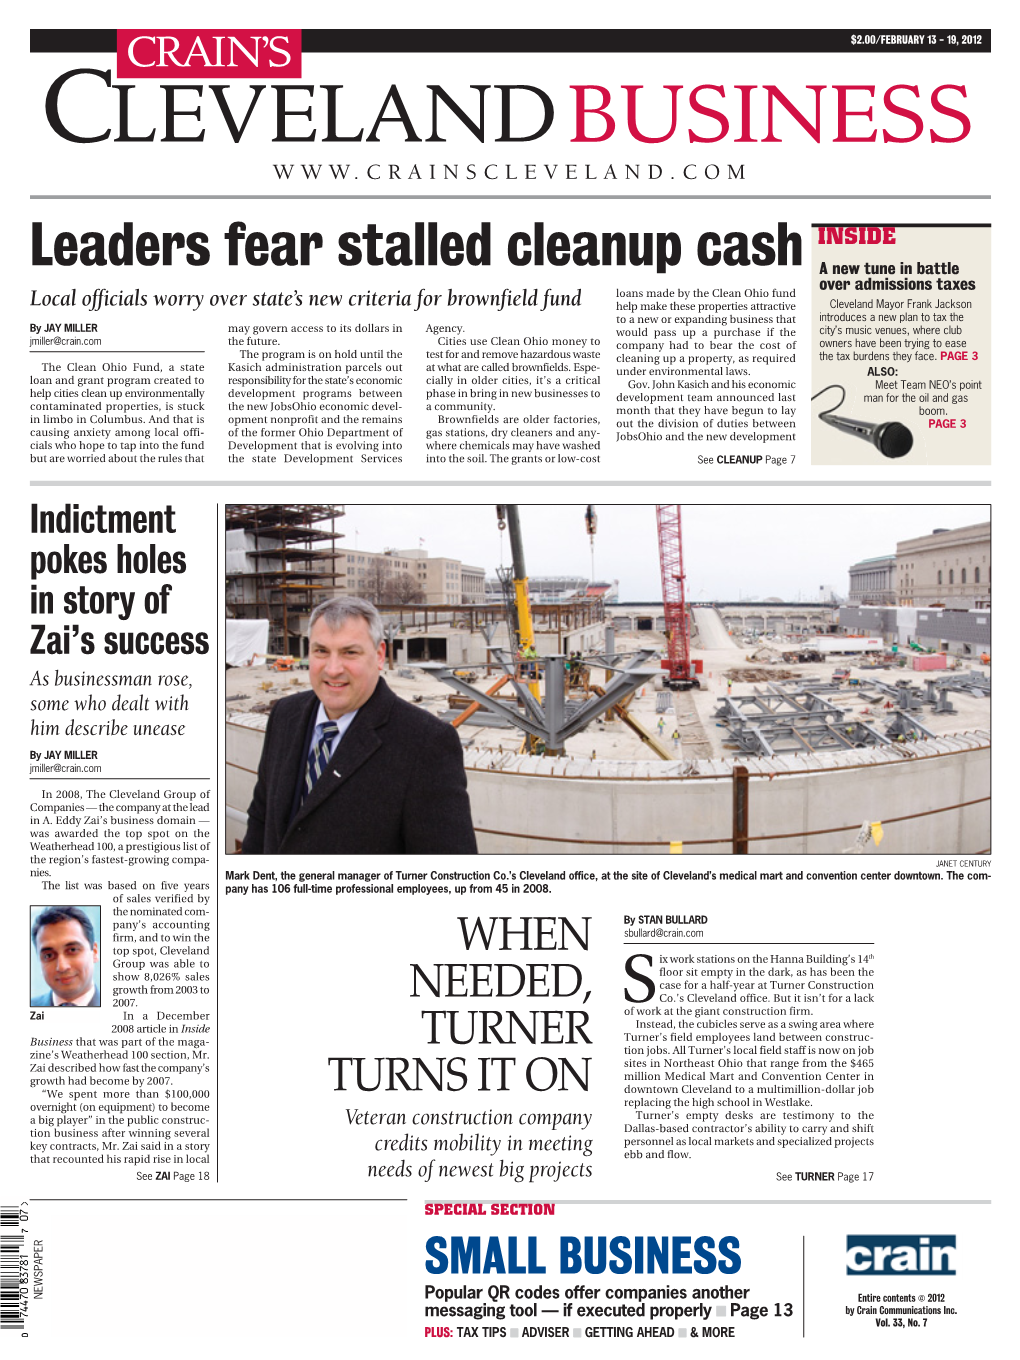 Leaders Fear Stalled Cleanup Cash INSIDE